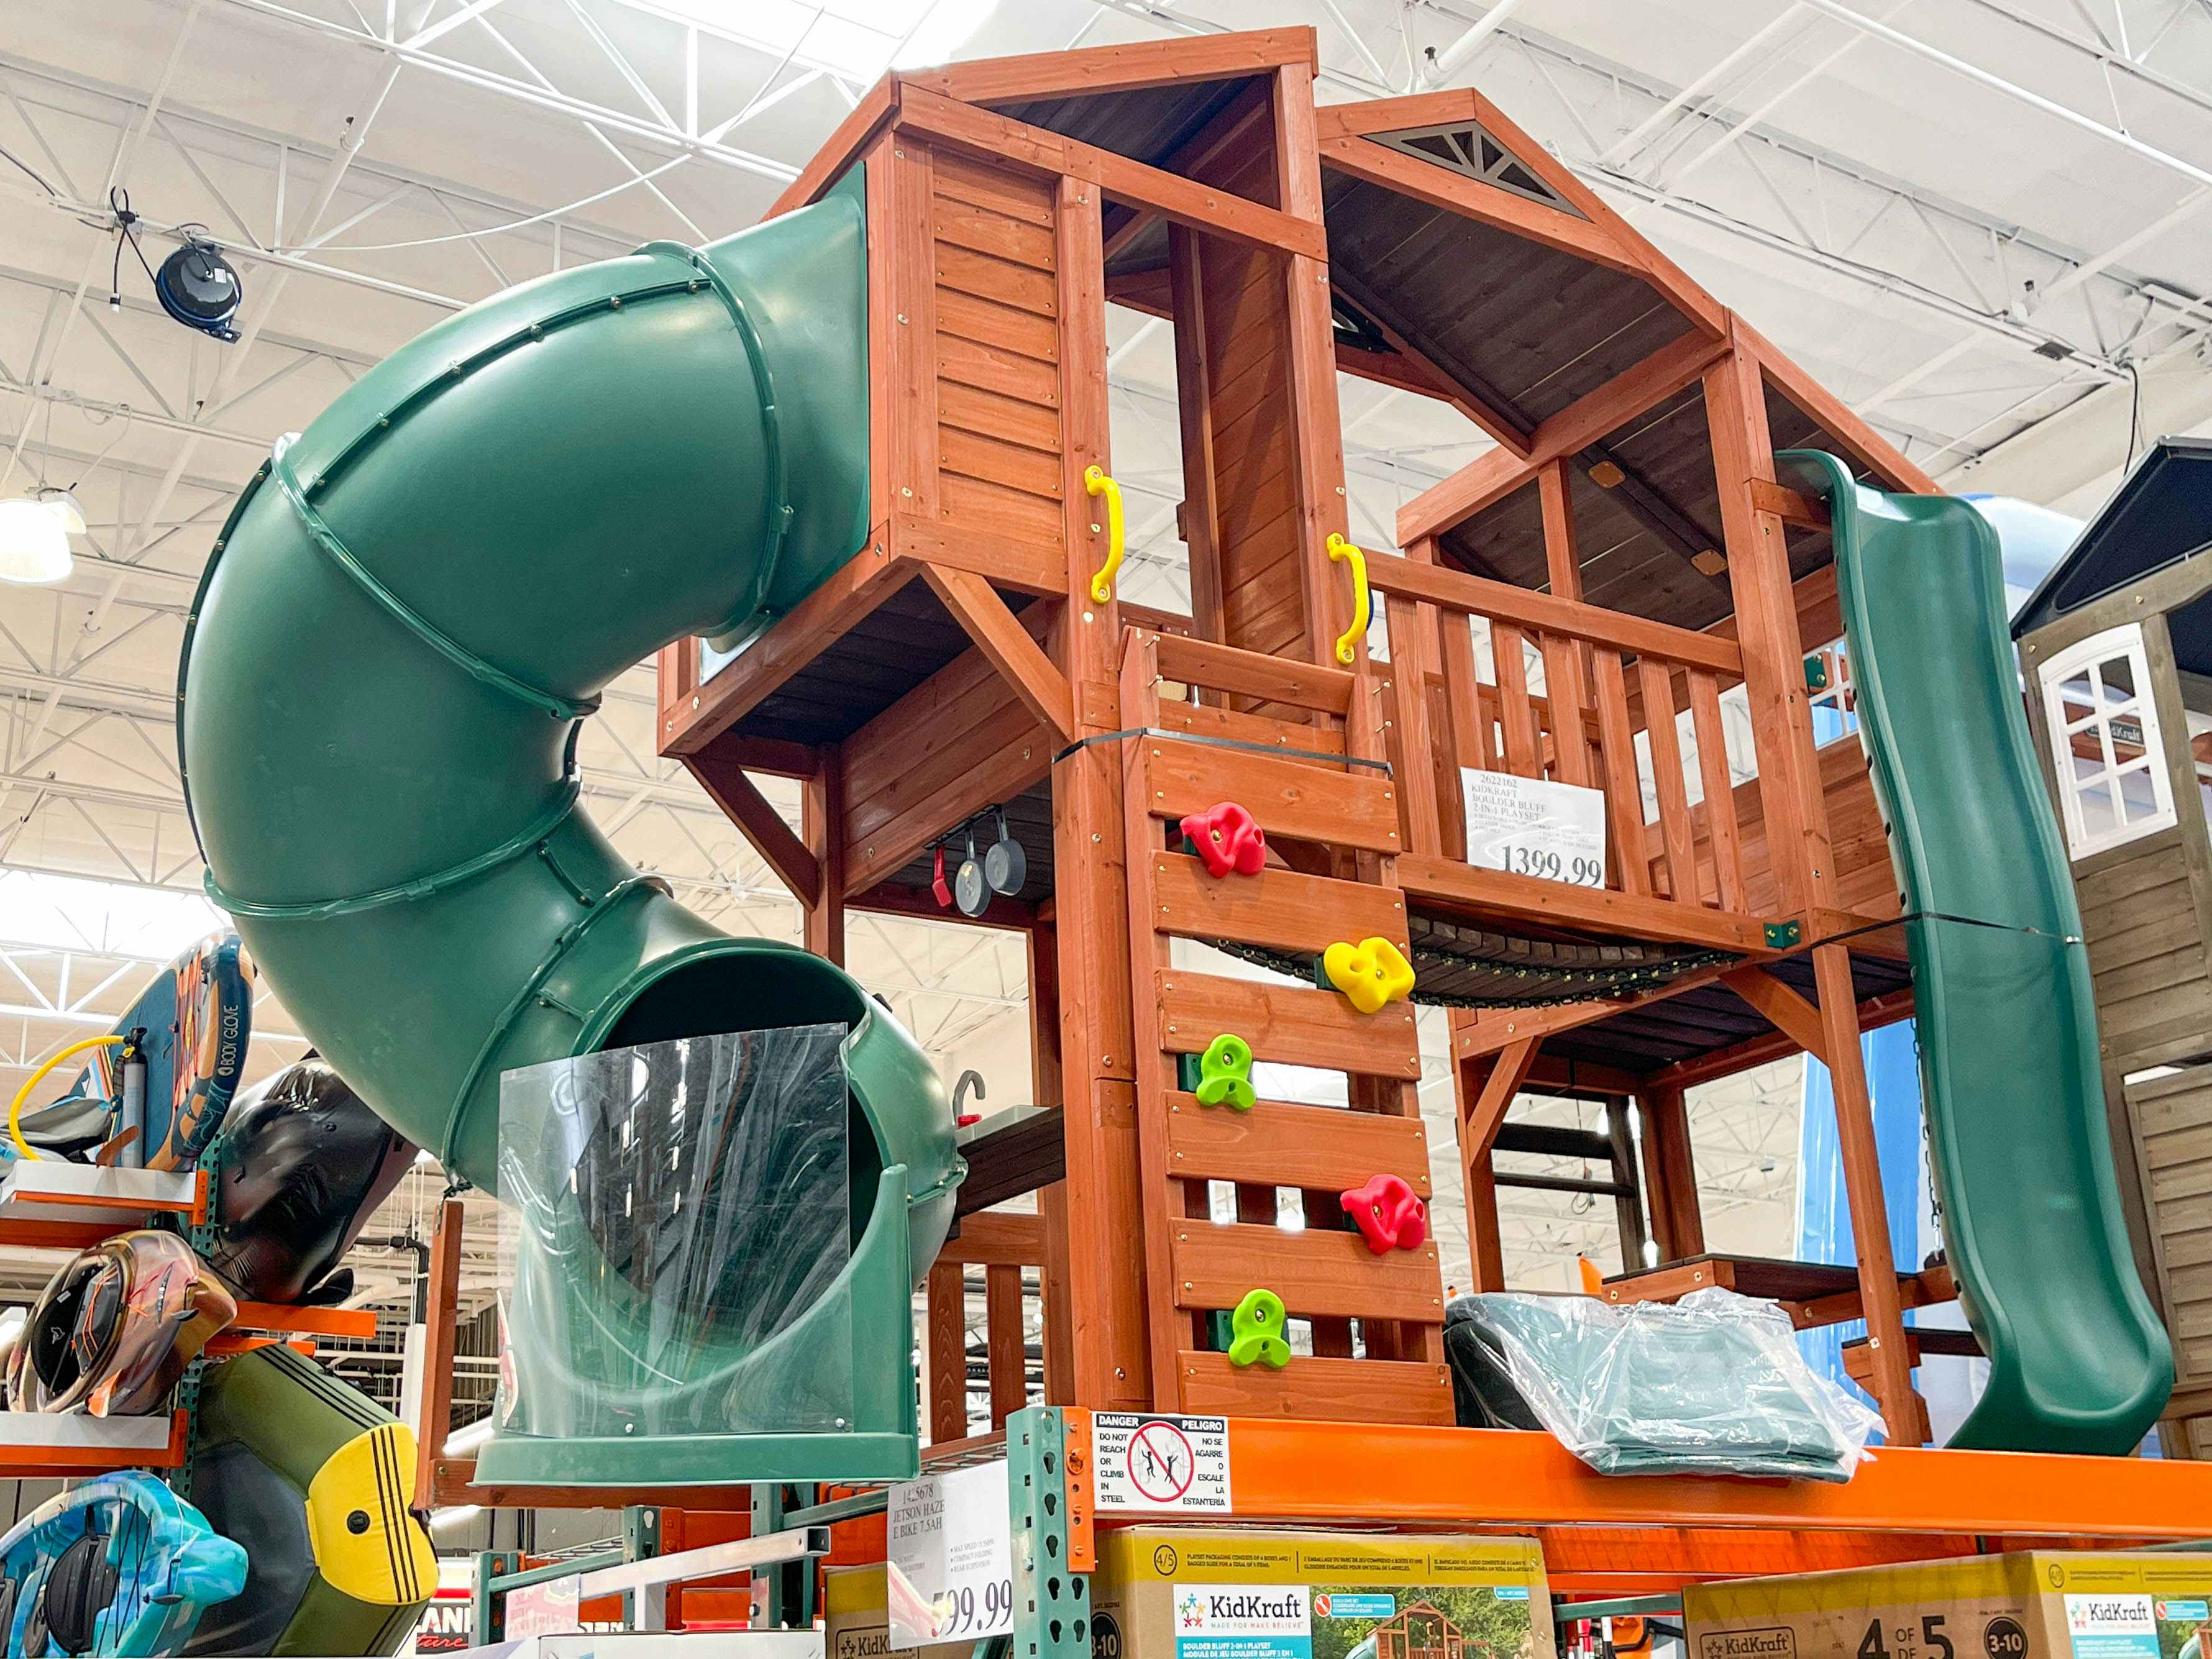 the in store display model of the costco playset